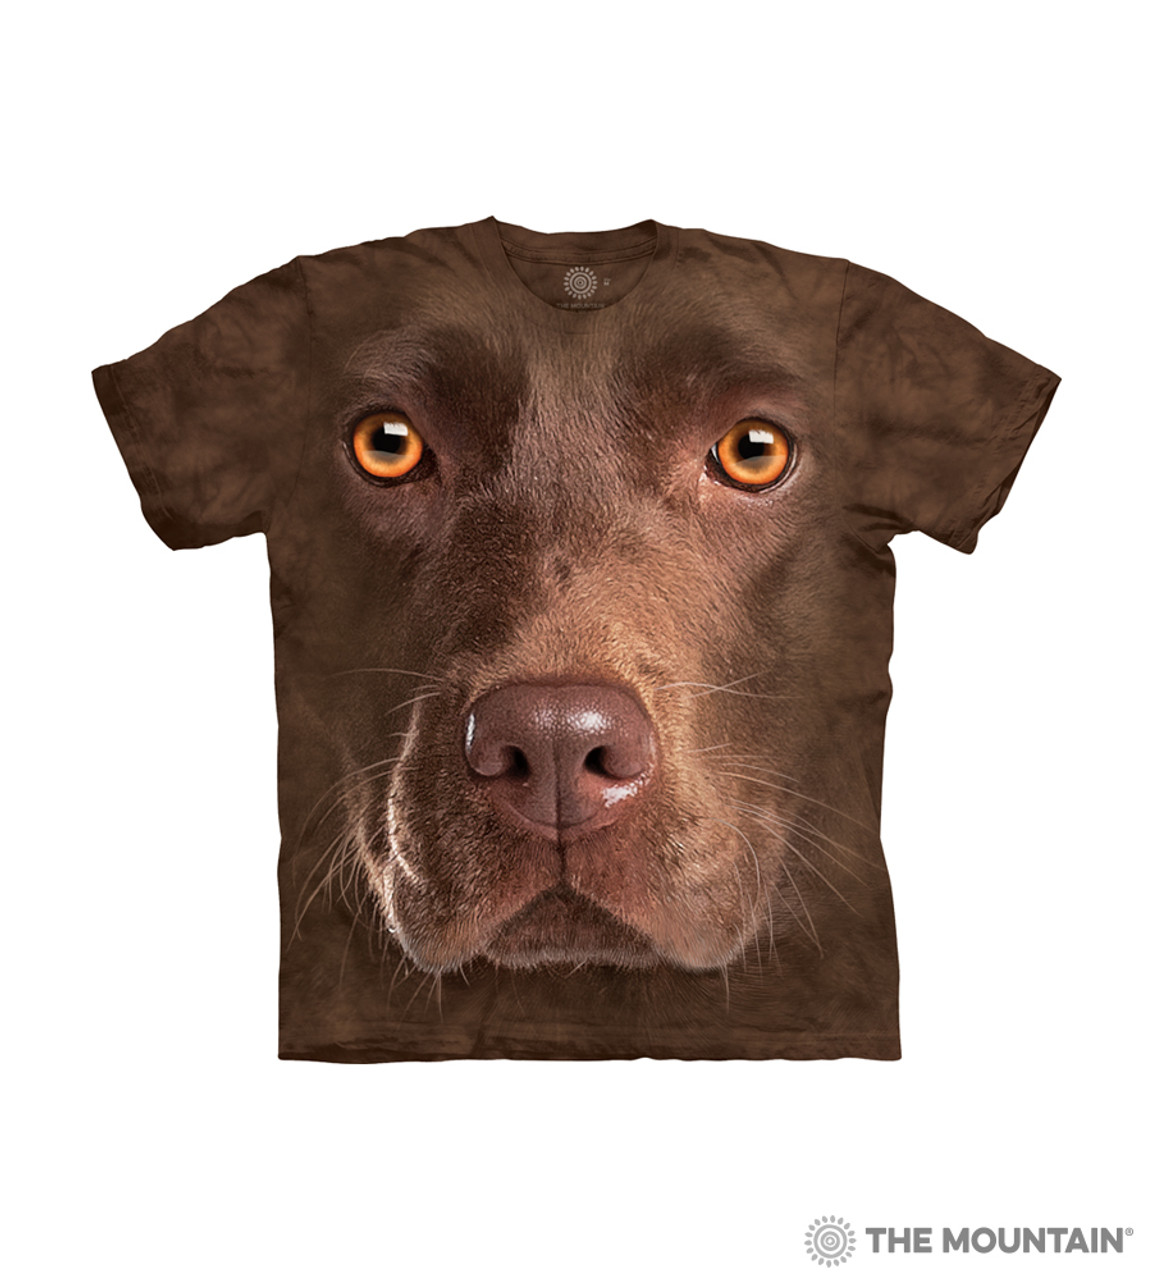 Dogs Boy Girl Child Sizes NEW Chocolate Lab Face Kids T-Shirt from The Mountain 